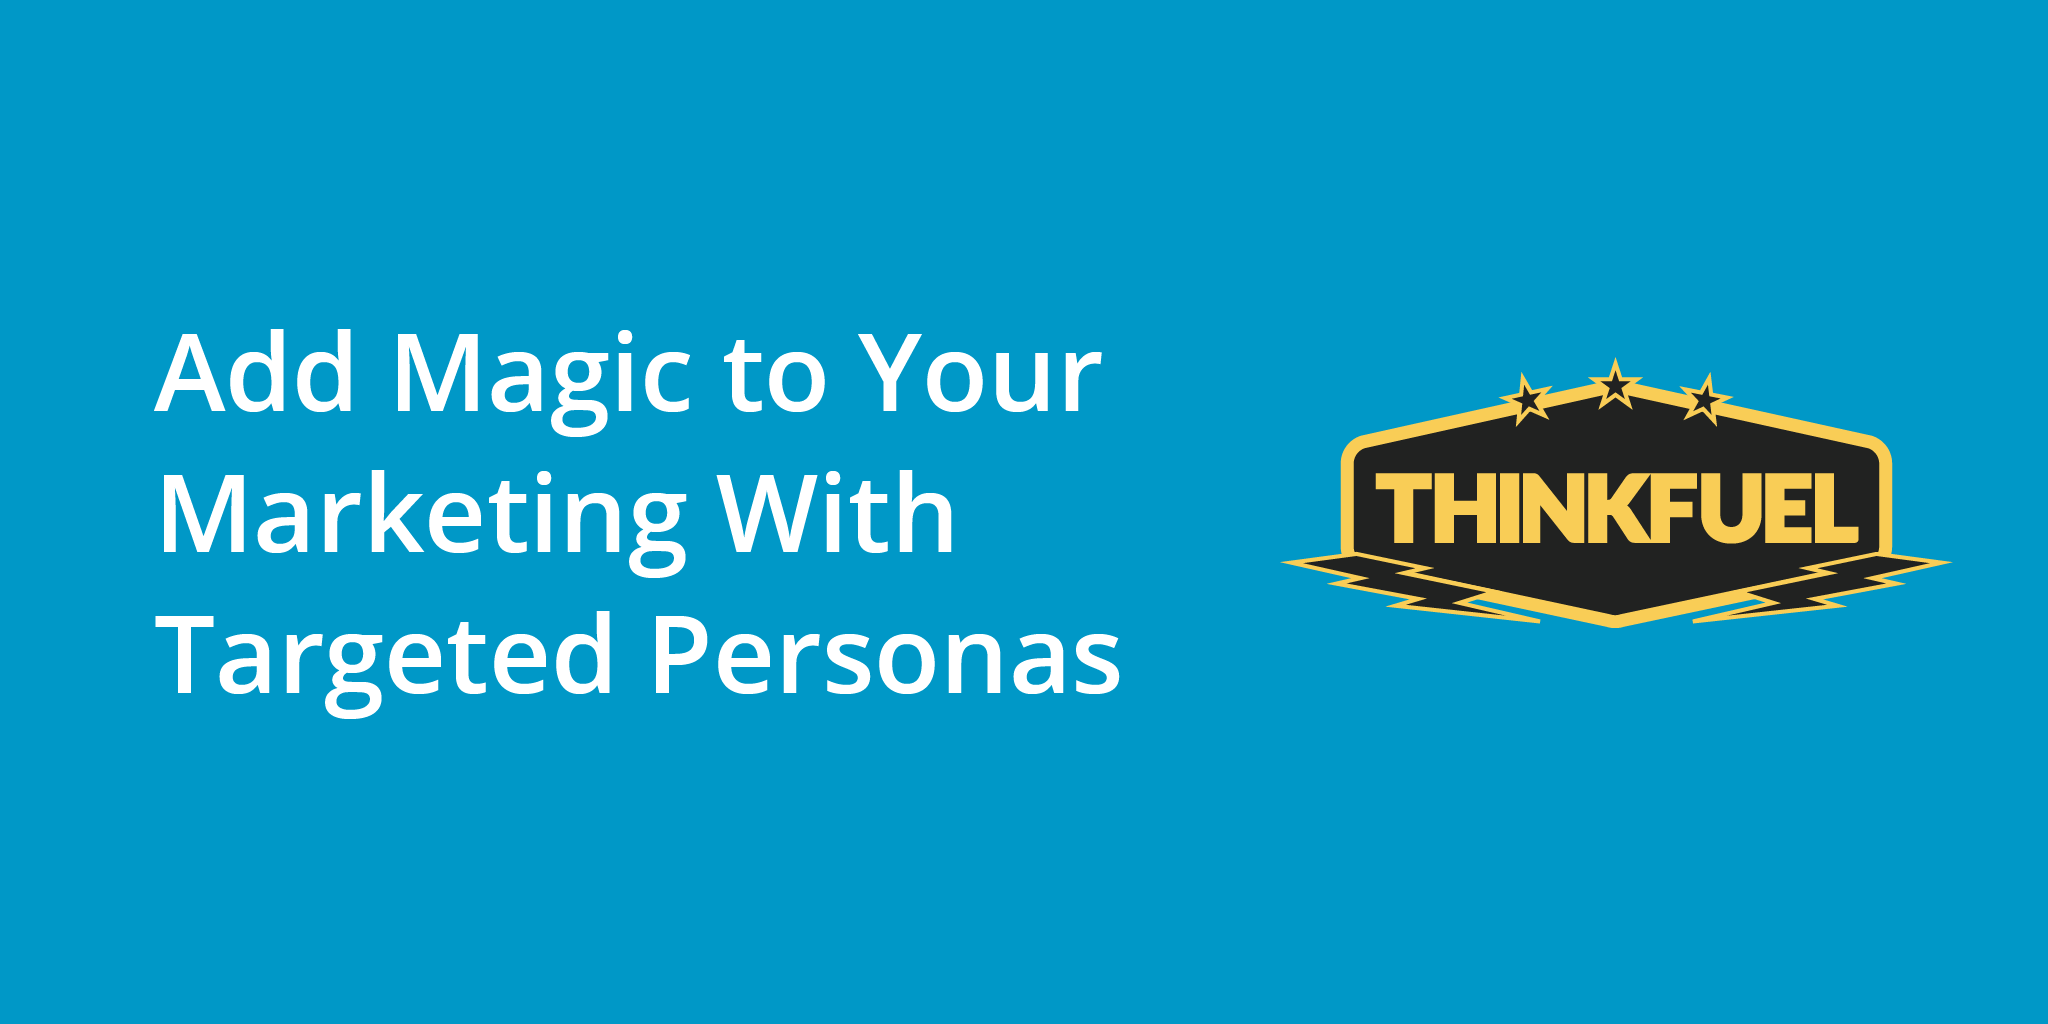 Add Magic to Your Marketing With Targeted Personas